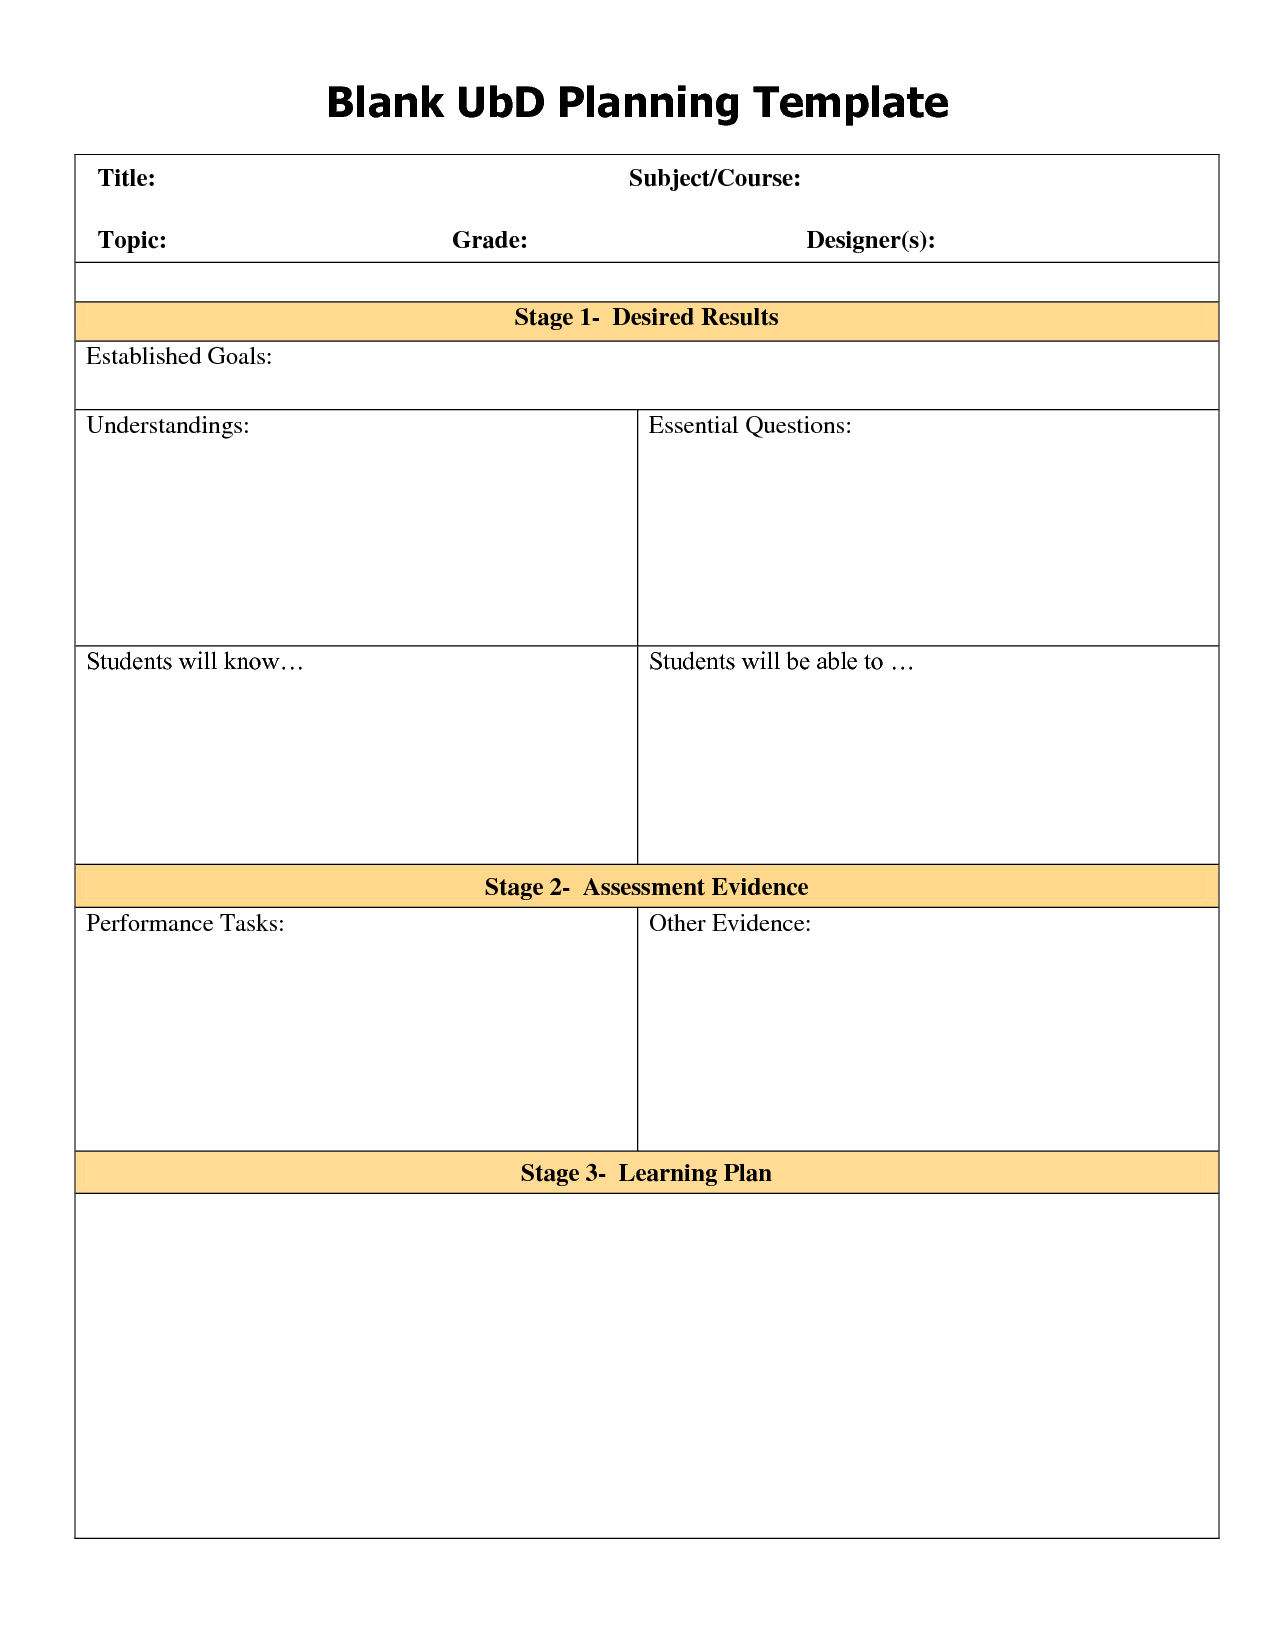 Blank Ubd Template | Blank Ubd Planning Template With Blank Unit Lesson Plan Template